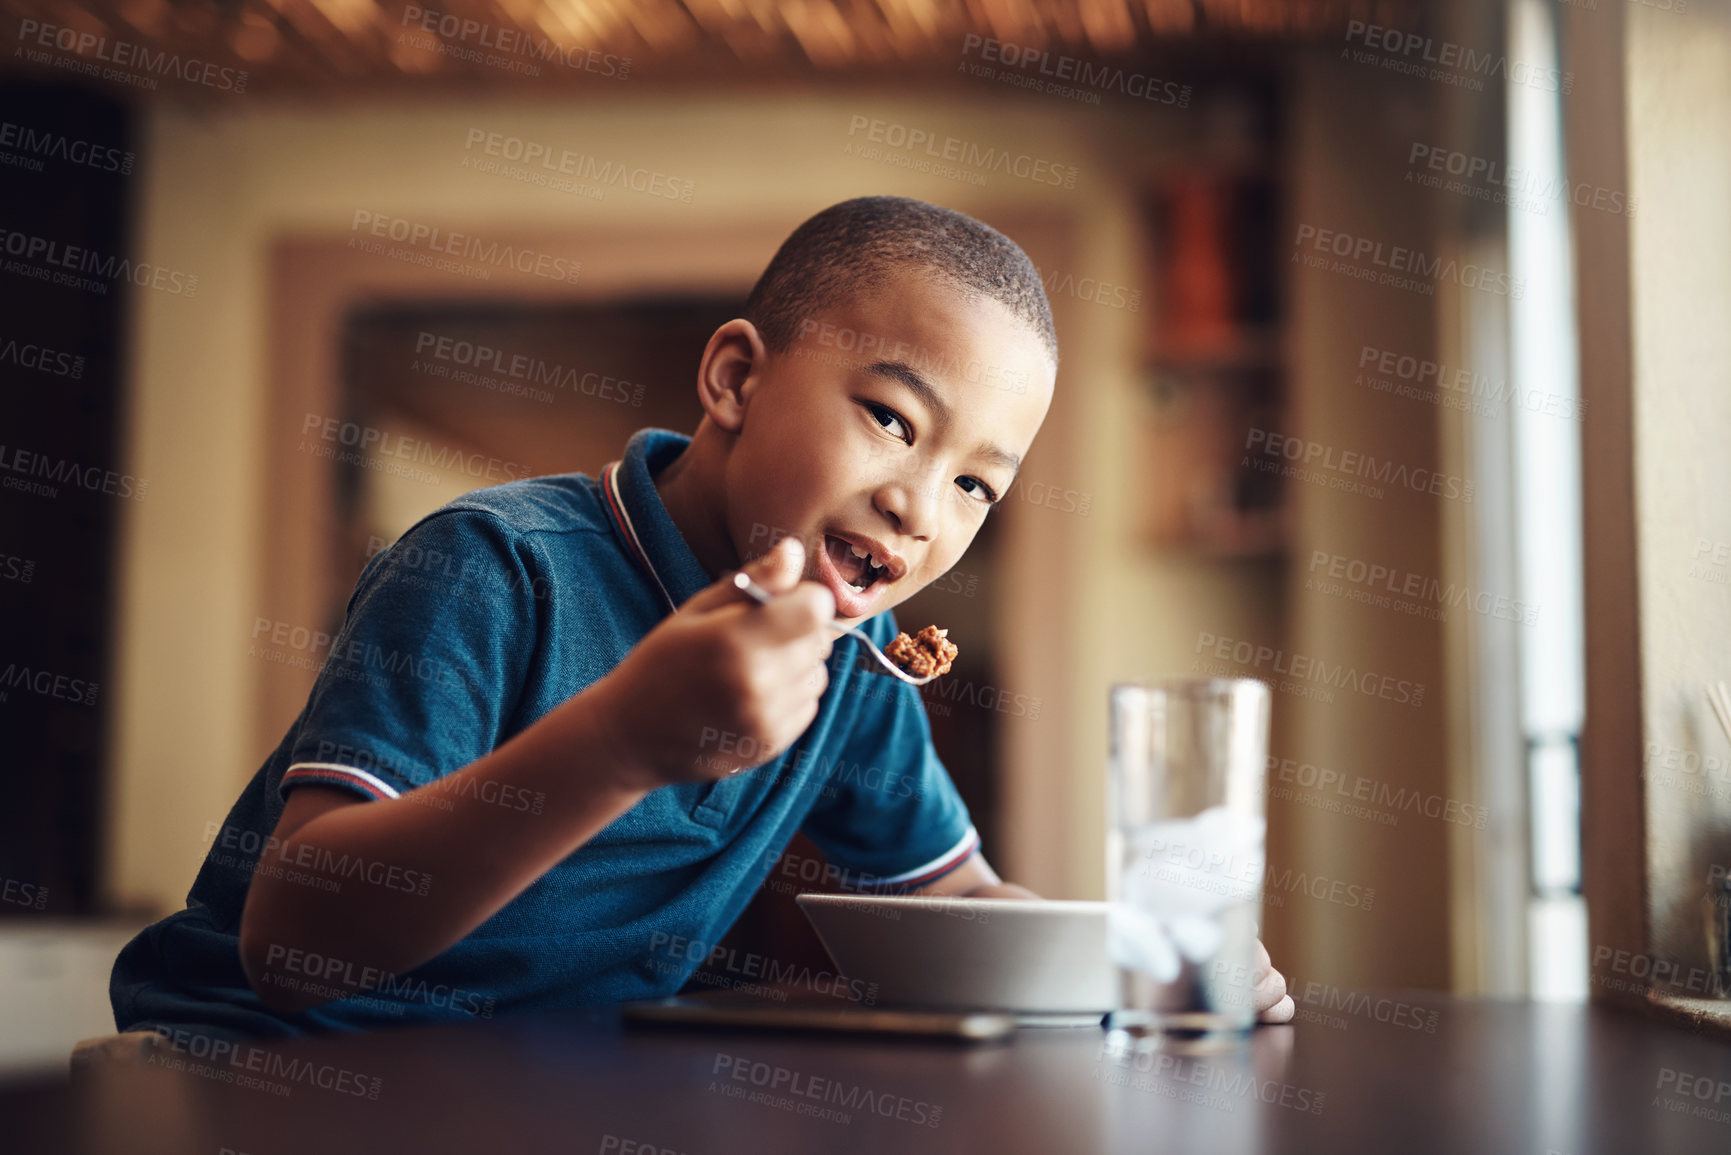 Buy stock photo Cropped shot of a young boy eating a bowl of spaghetti at home